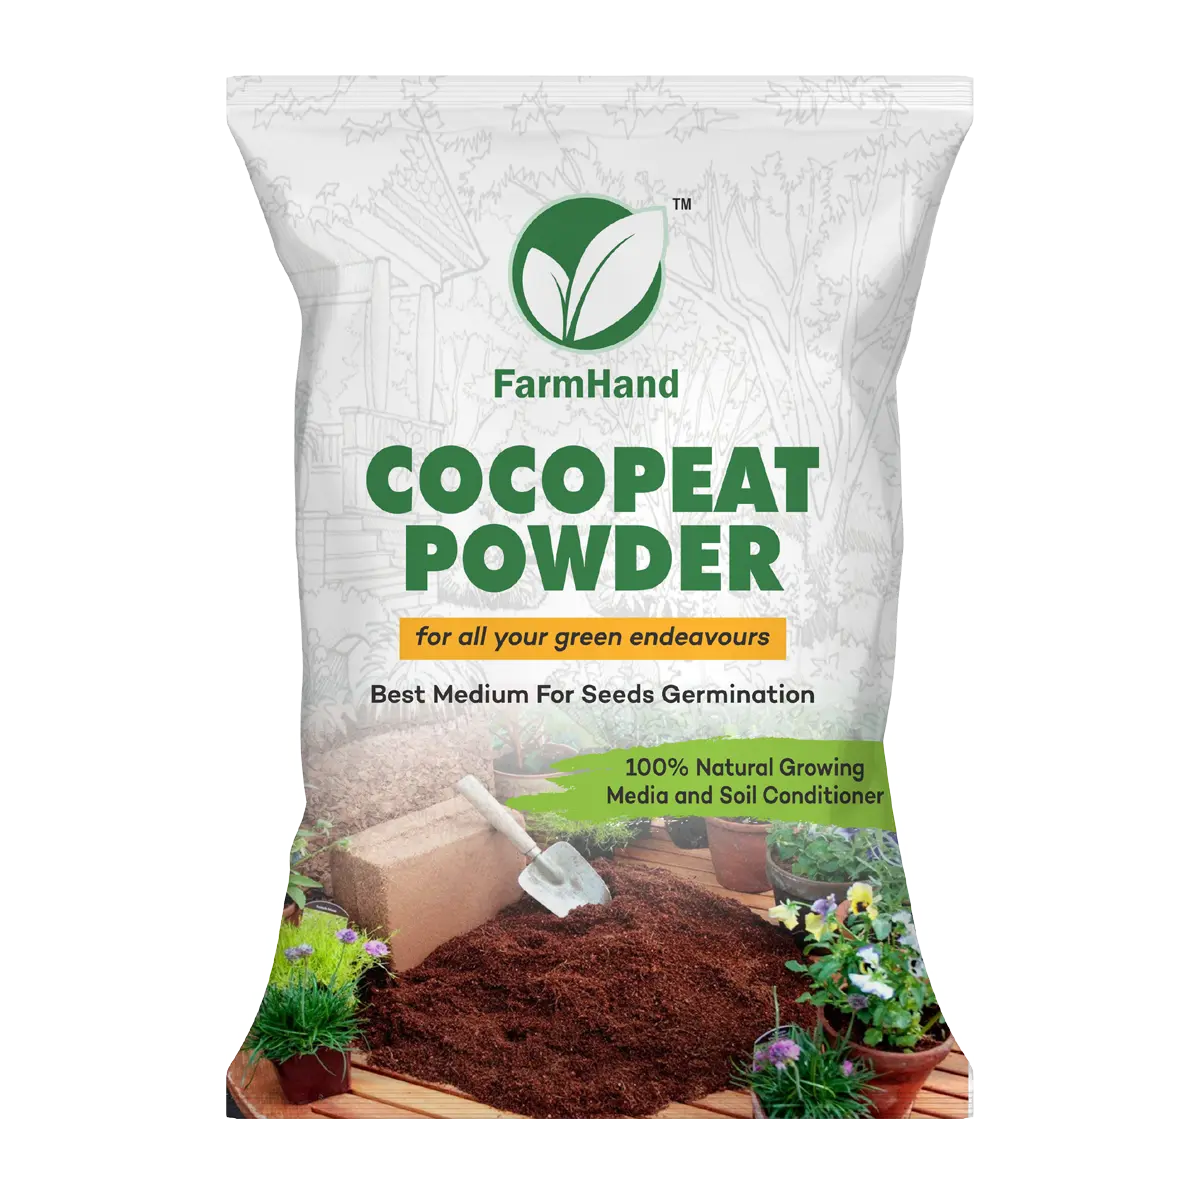 cocopeat-powder-front